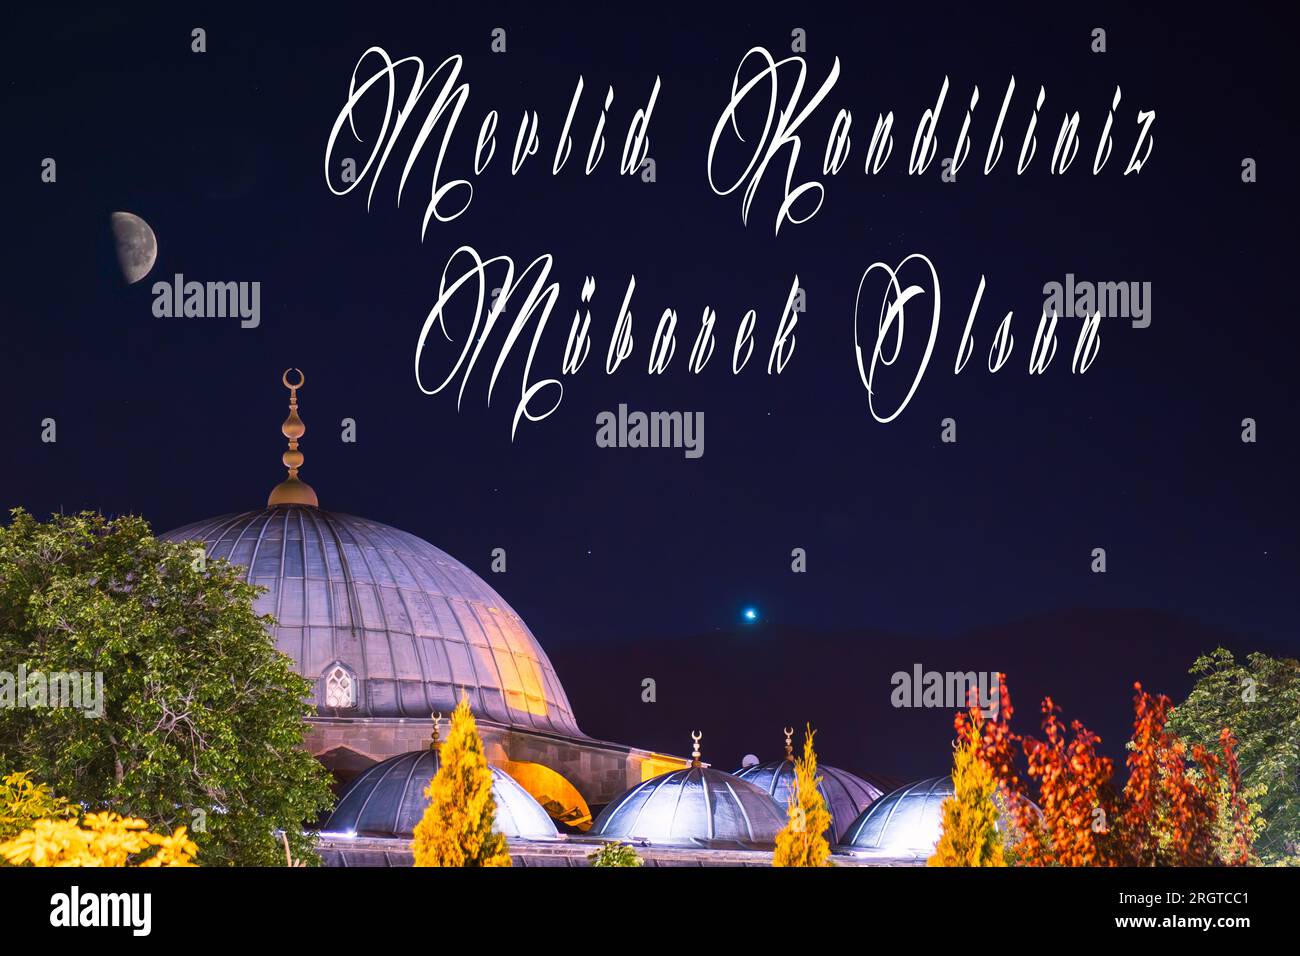 Mevlid Kandiliniz Mubarek Olsun. Lalapasa Mosque and half moon . text in the picture mawlid oil lamp Stock Photo